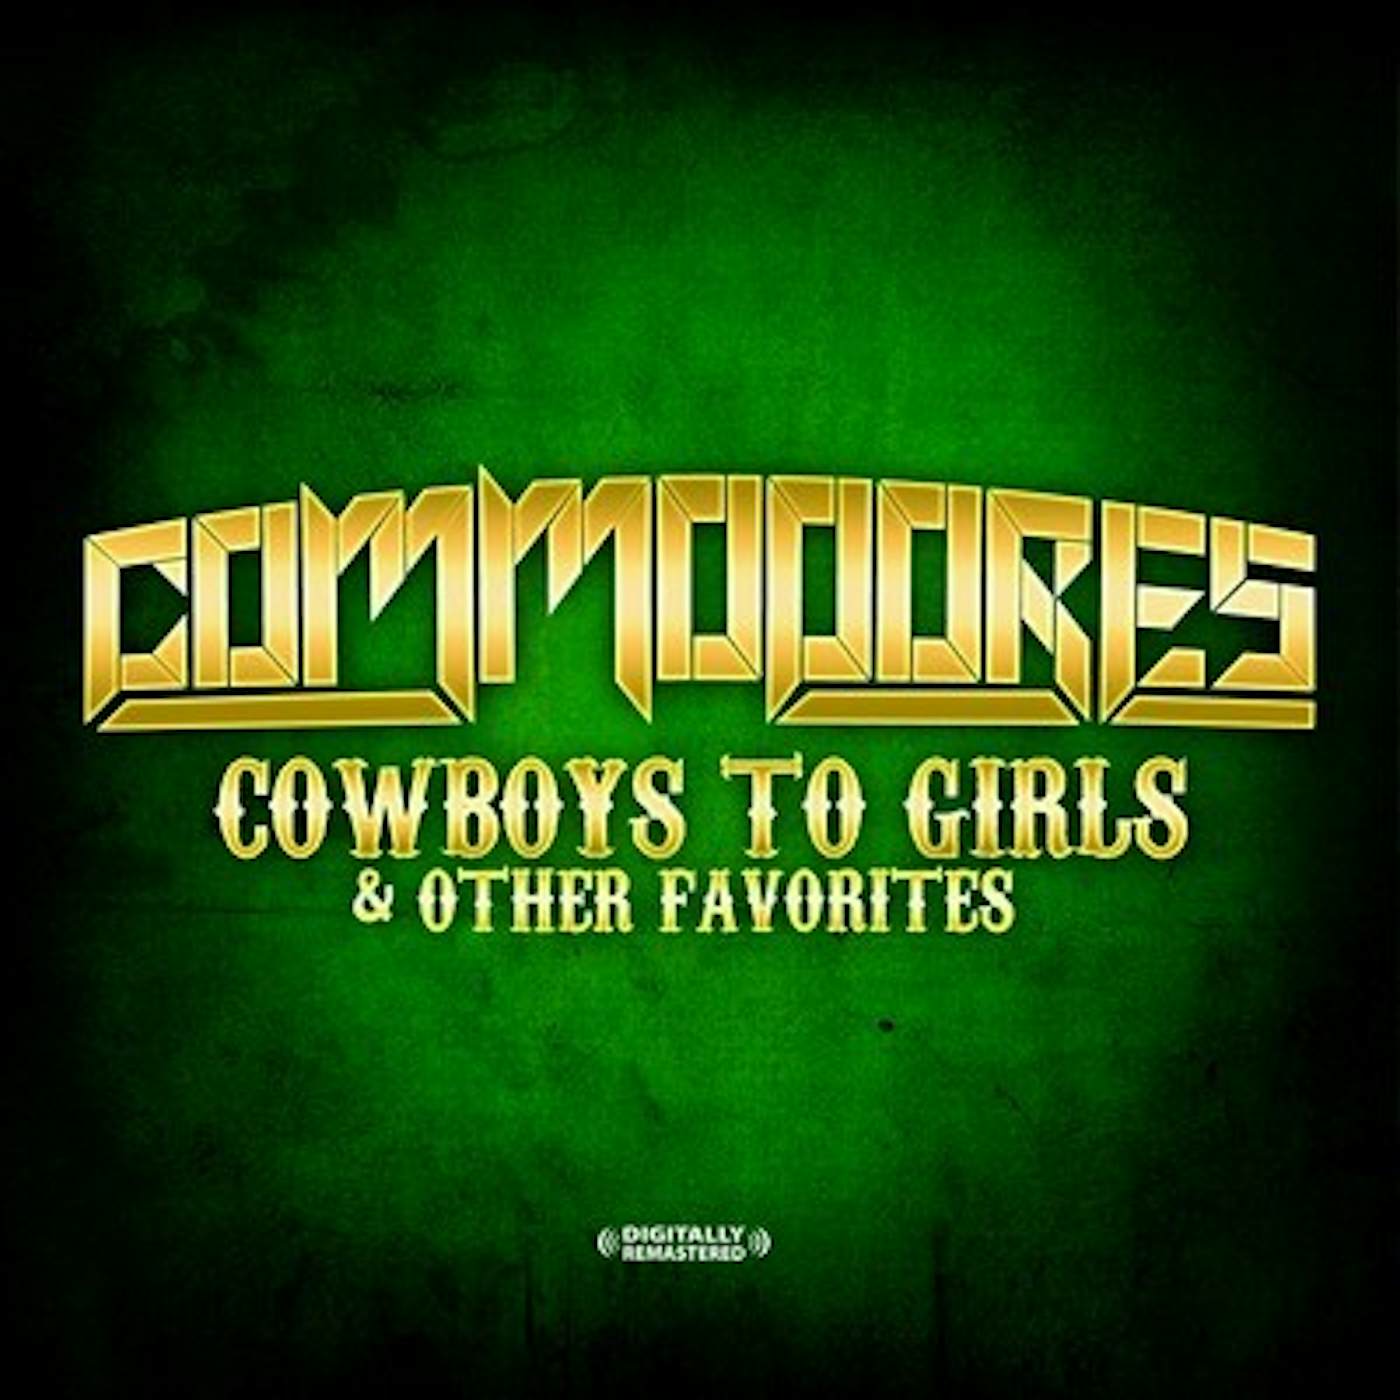 Commodores COWBOYS TO GIRLS & OTHER FAVORITES CD